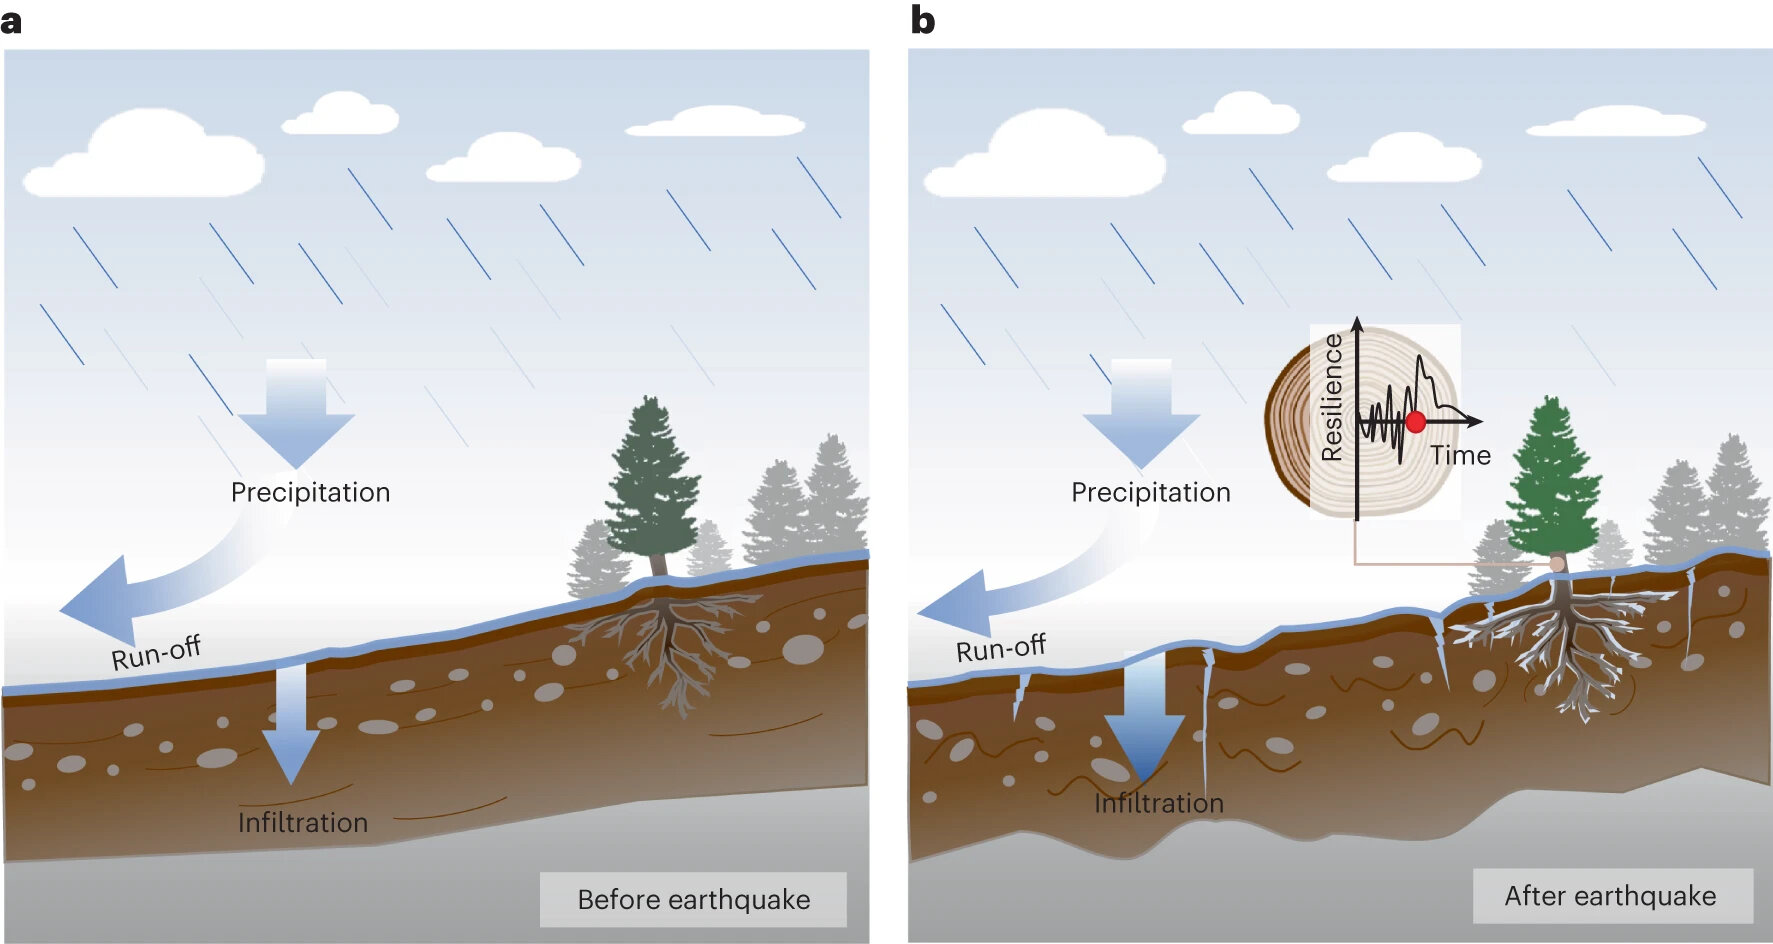 Earthquakes impact forest resilience for decades post-event, research suggests